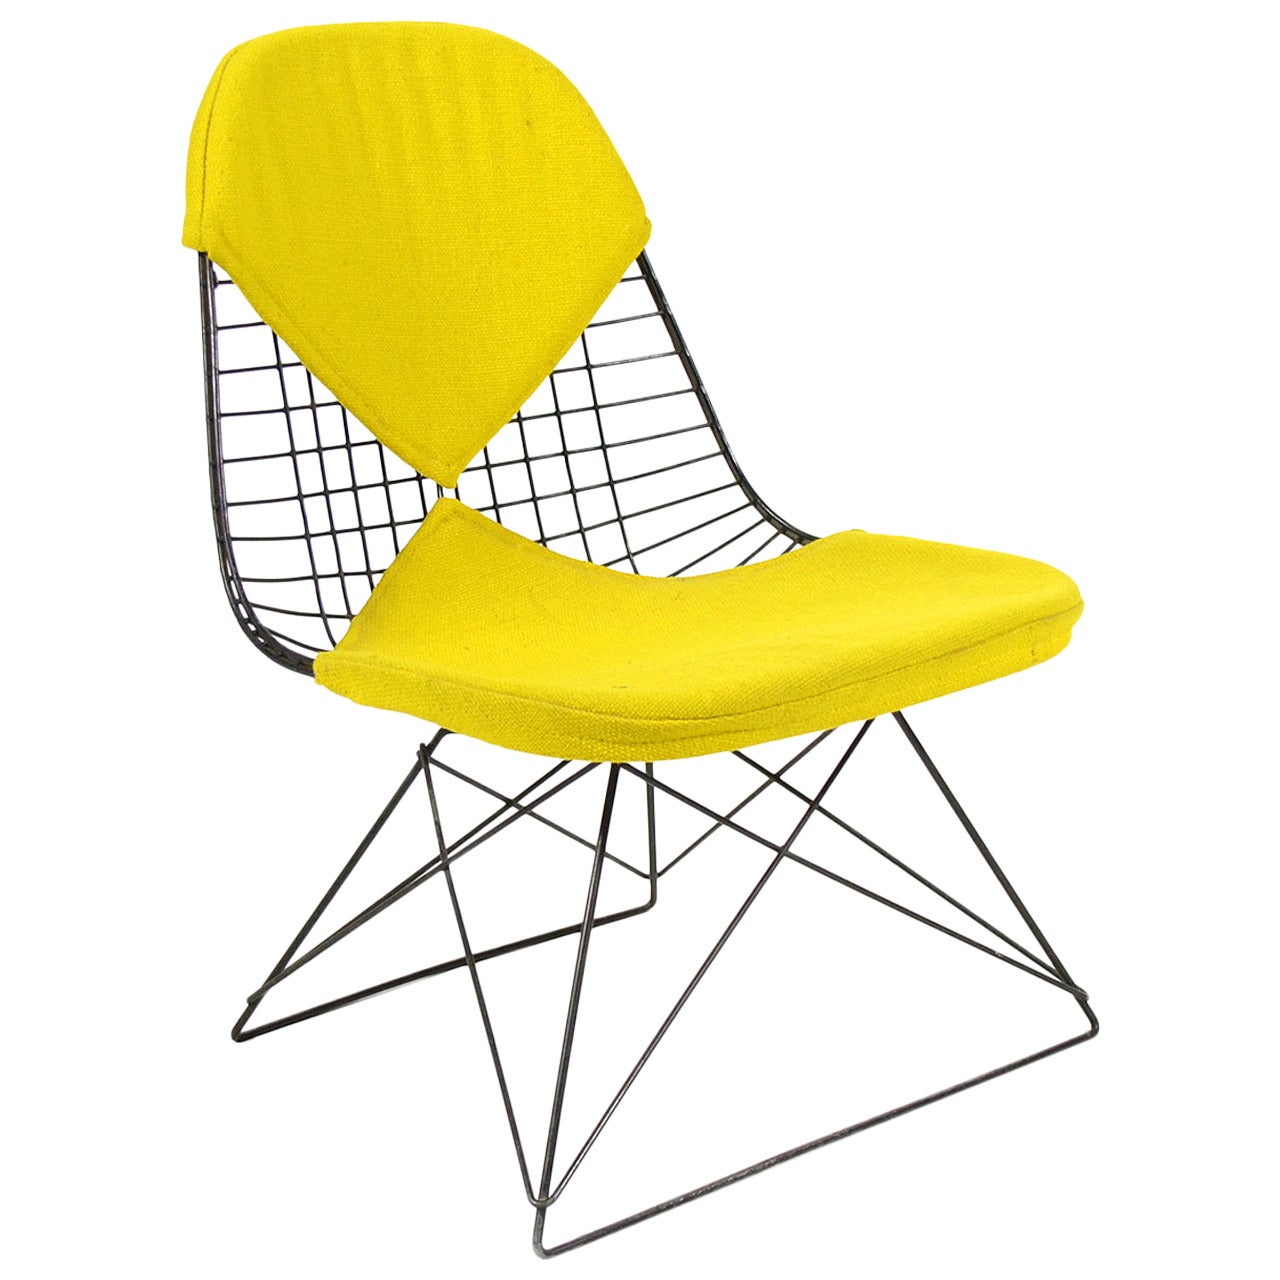 Early Charles and Ray Eames LKR-2 Lounge Chair by Herman Miller